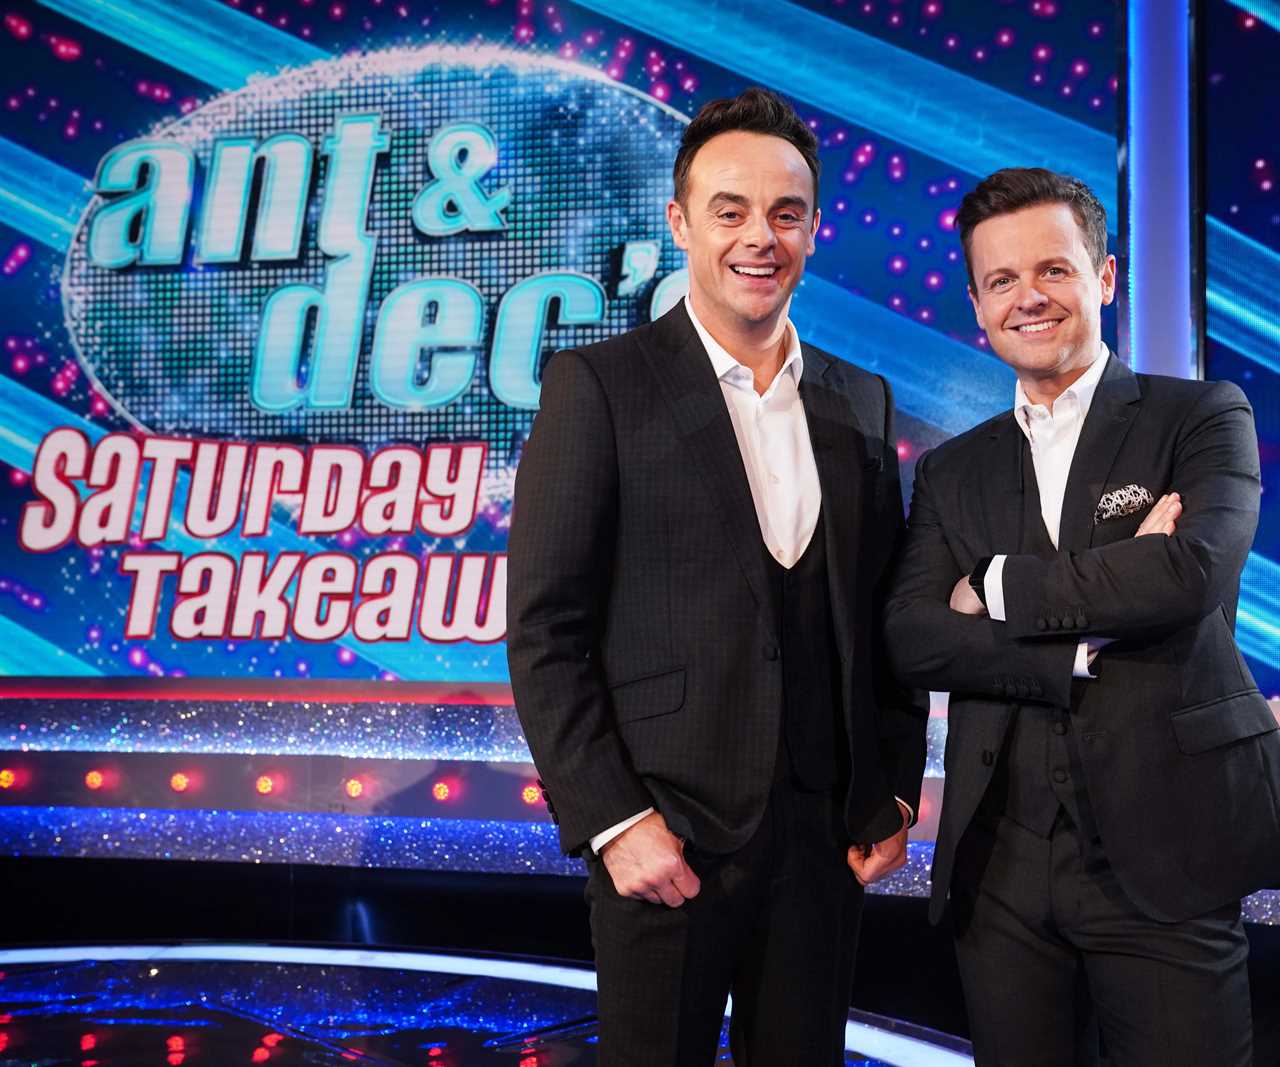 Ant and Dec’s Saturday Night Takeaway moved tonight for Six Nations rugby – so fans need to make sure not to miss it